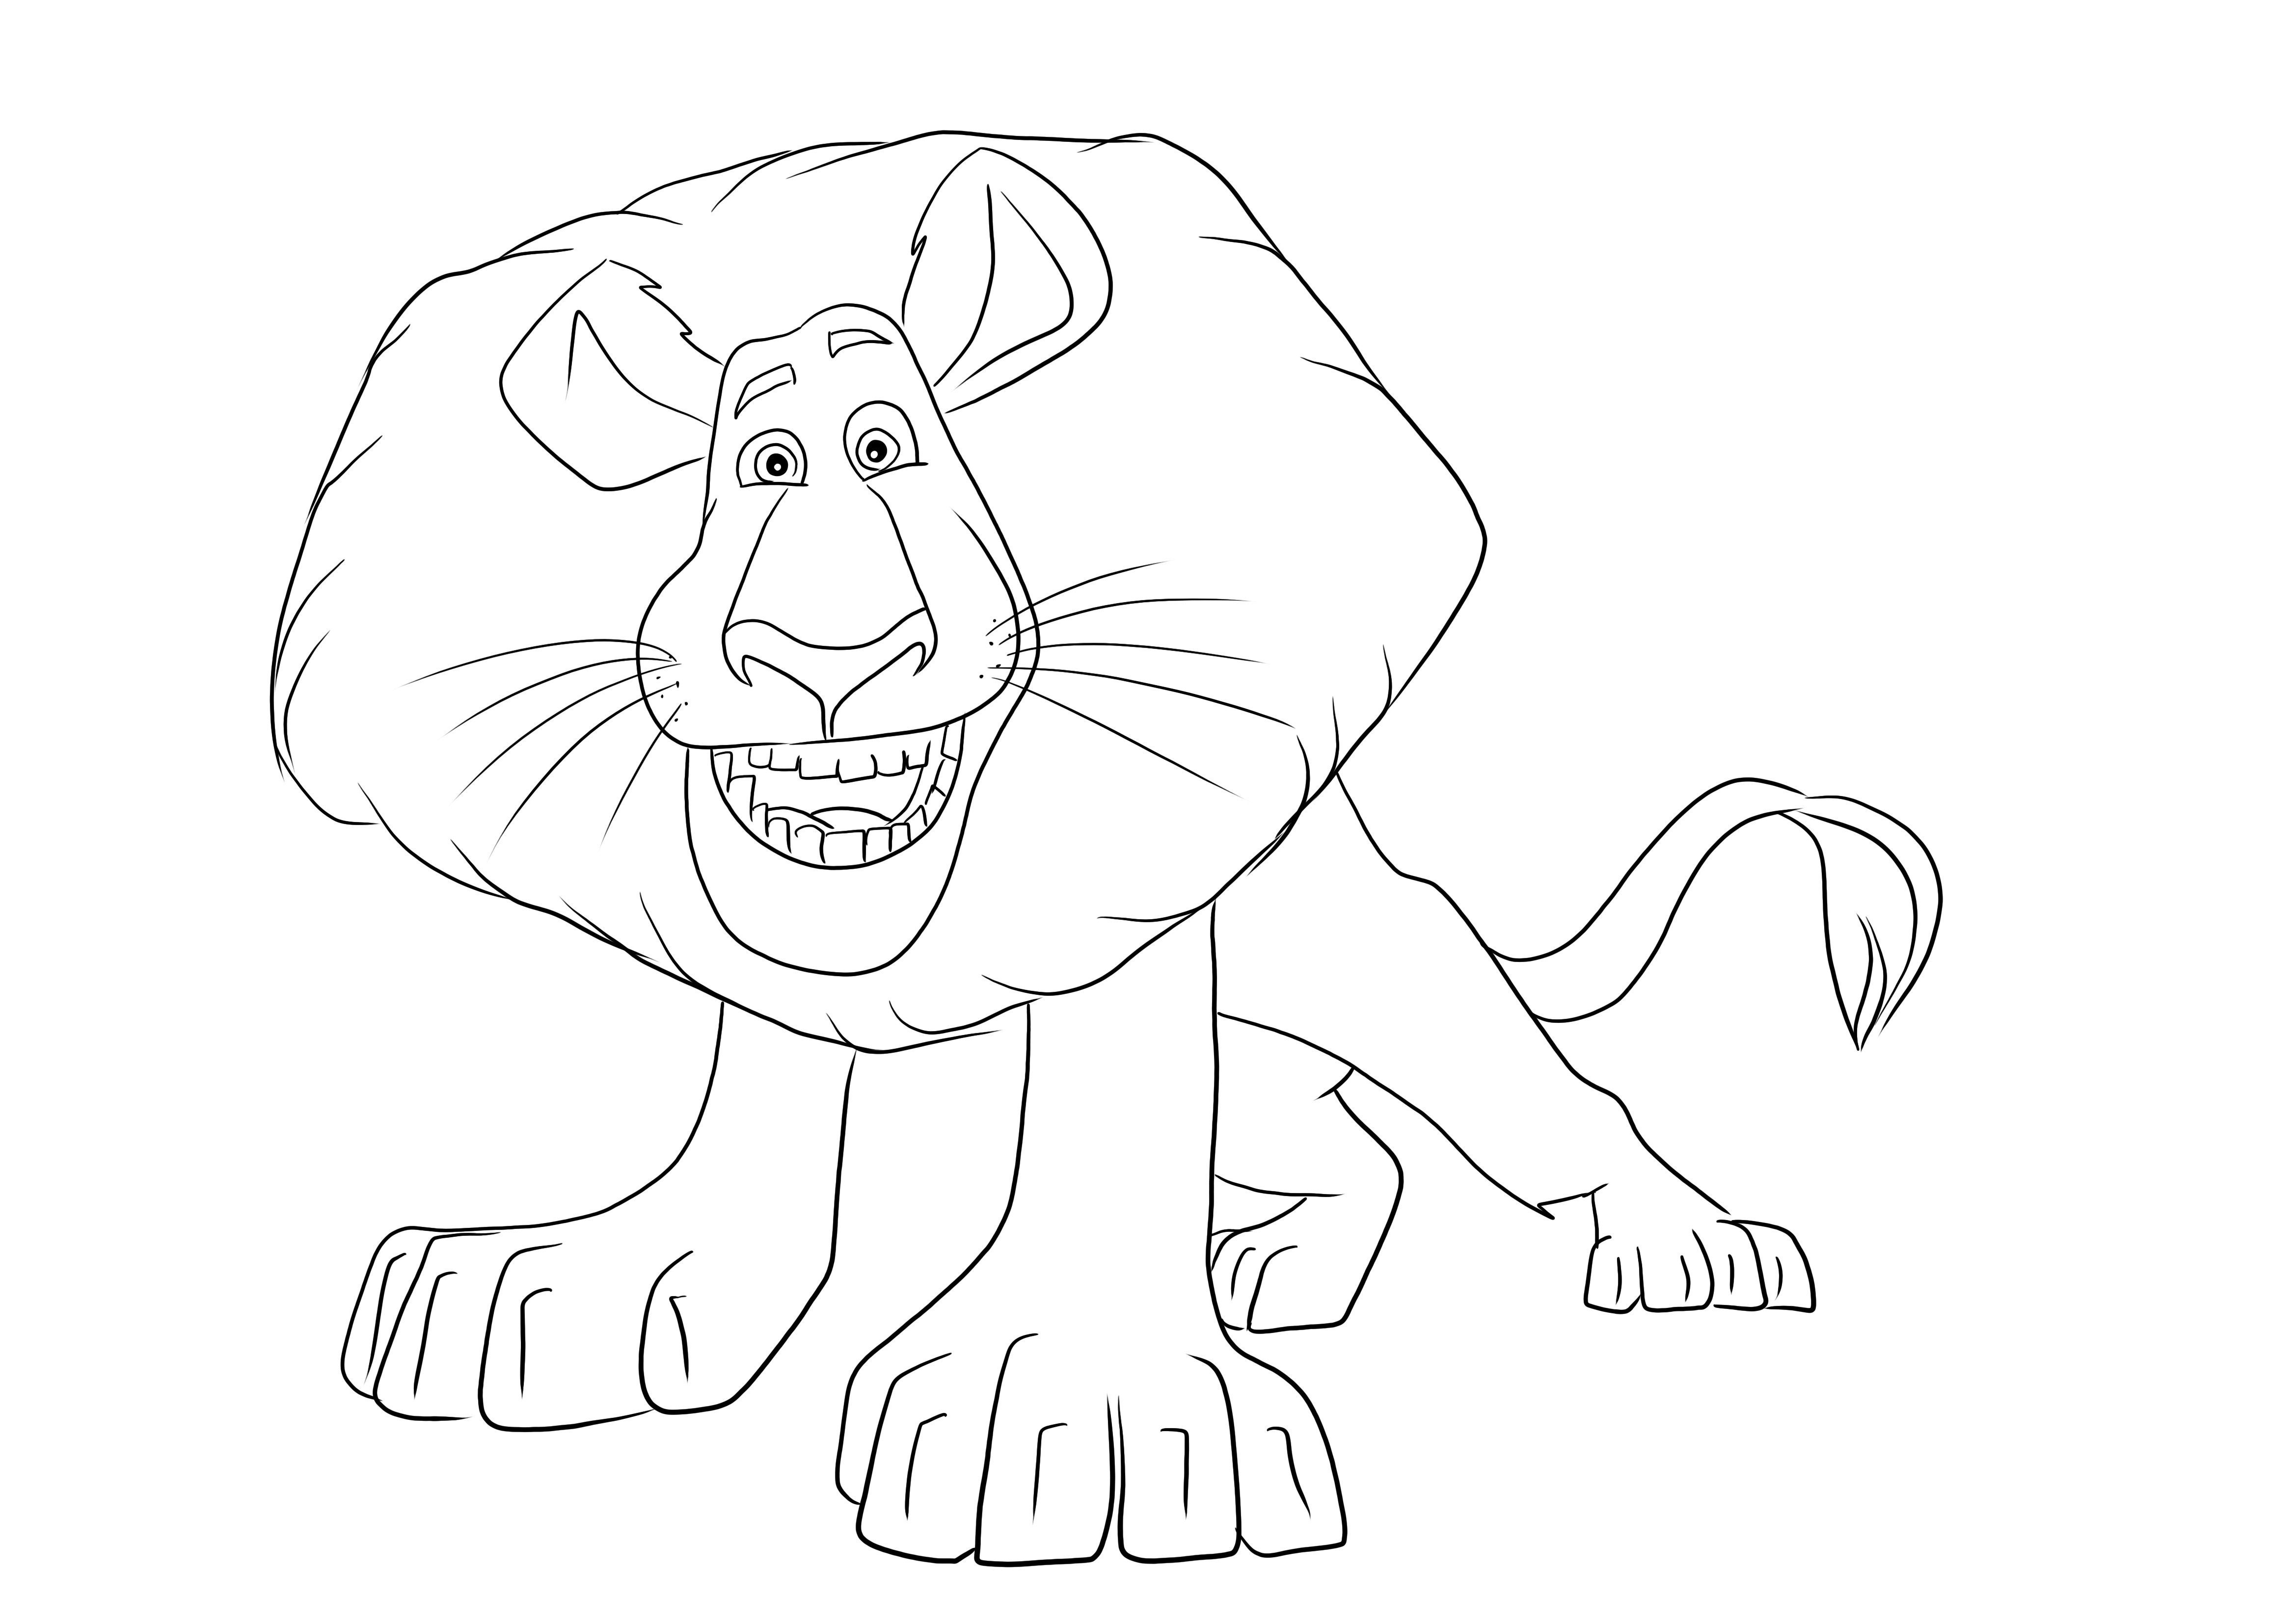 Alex the Lion for free coloring and printing for kids to have fun